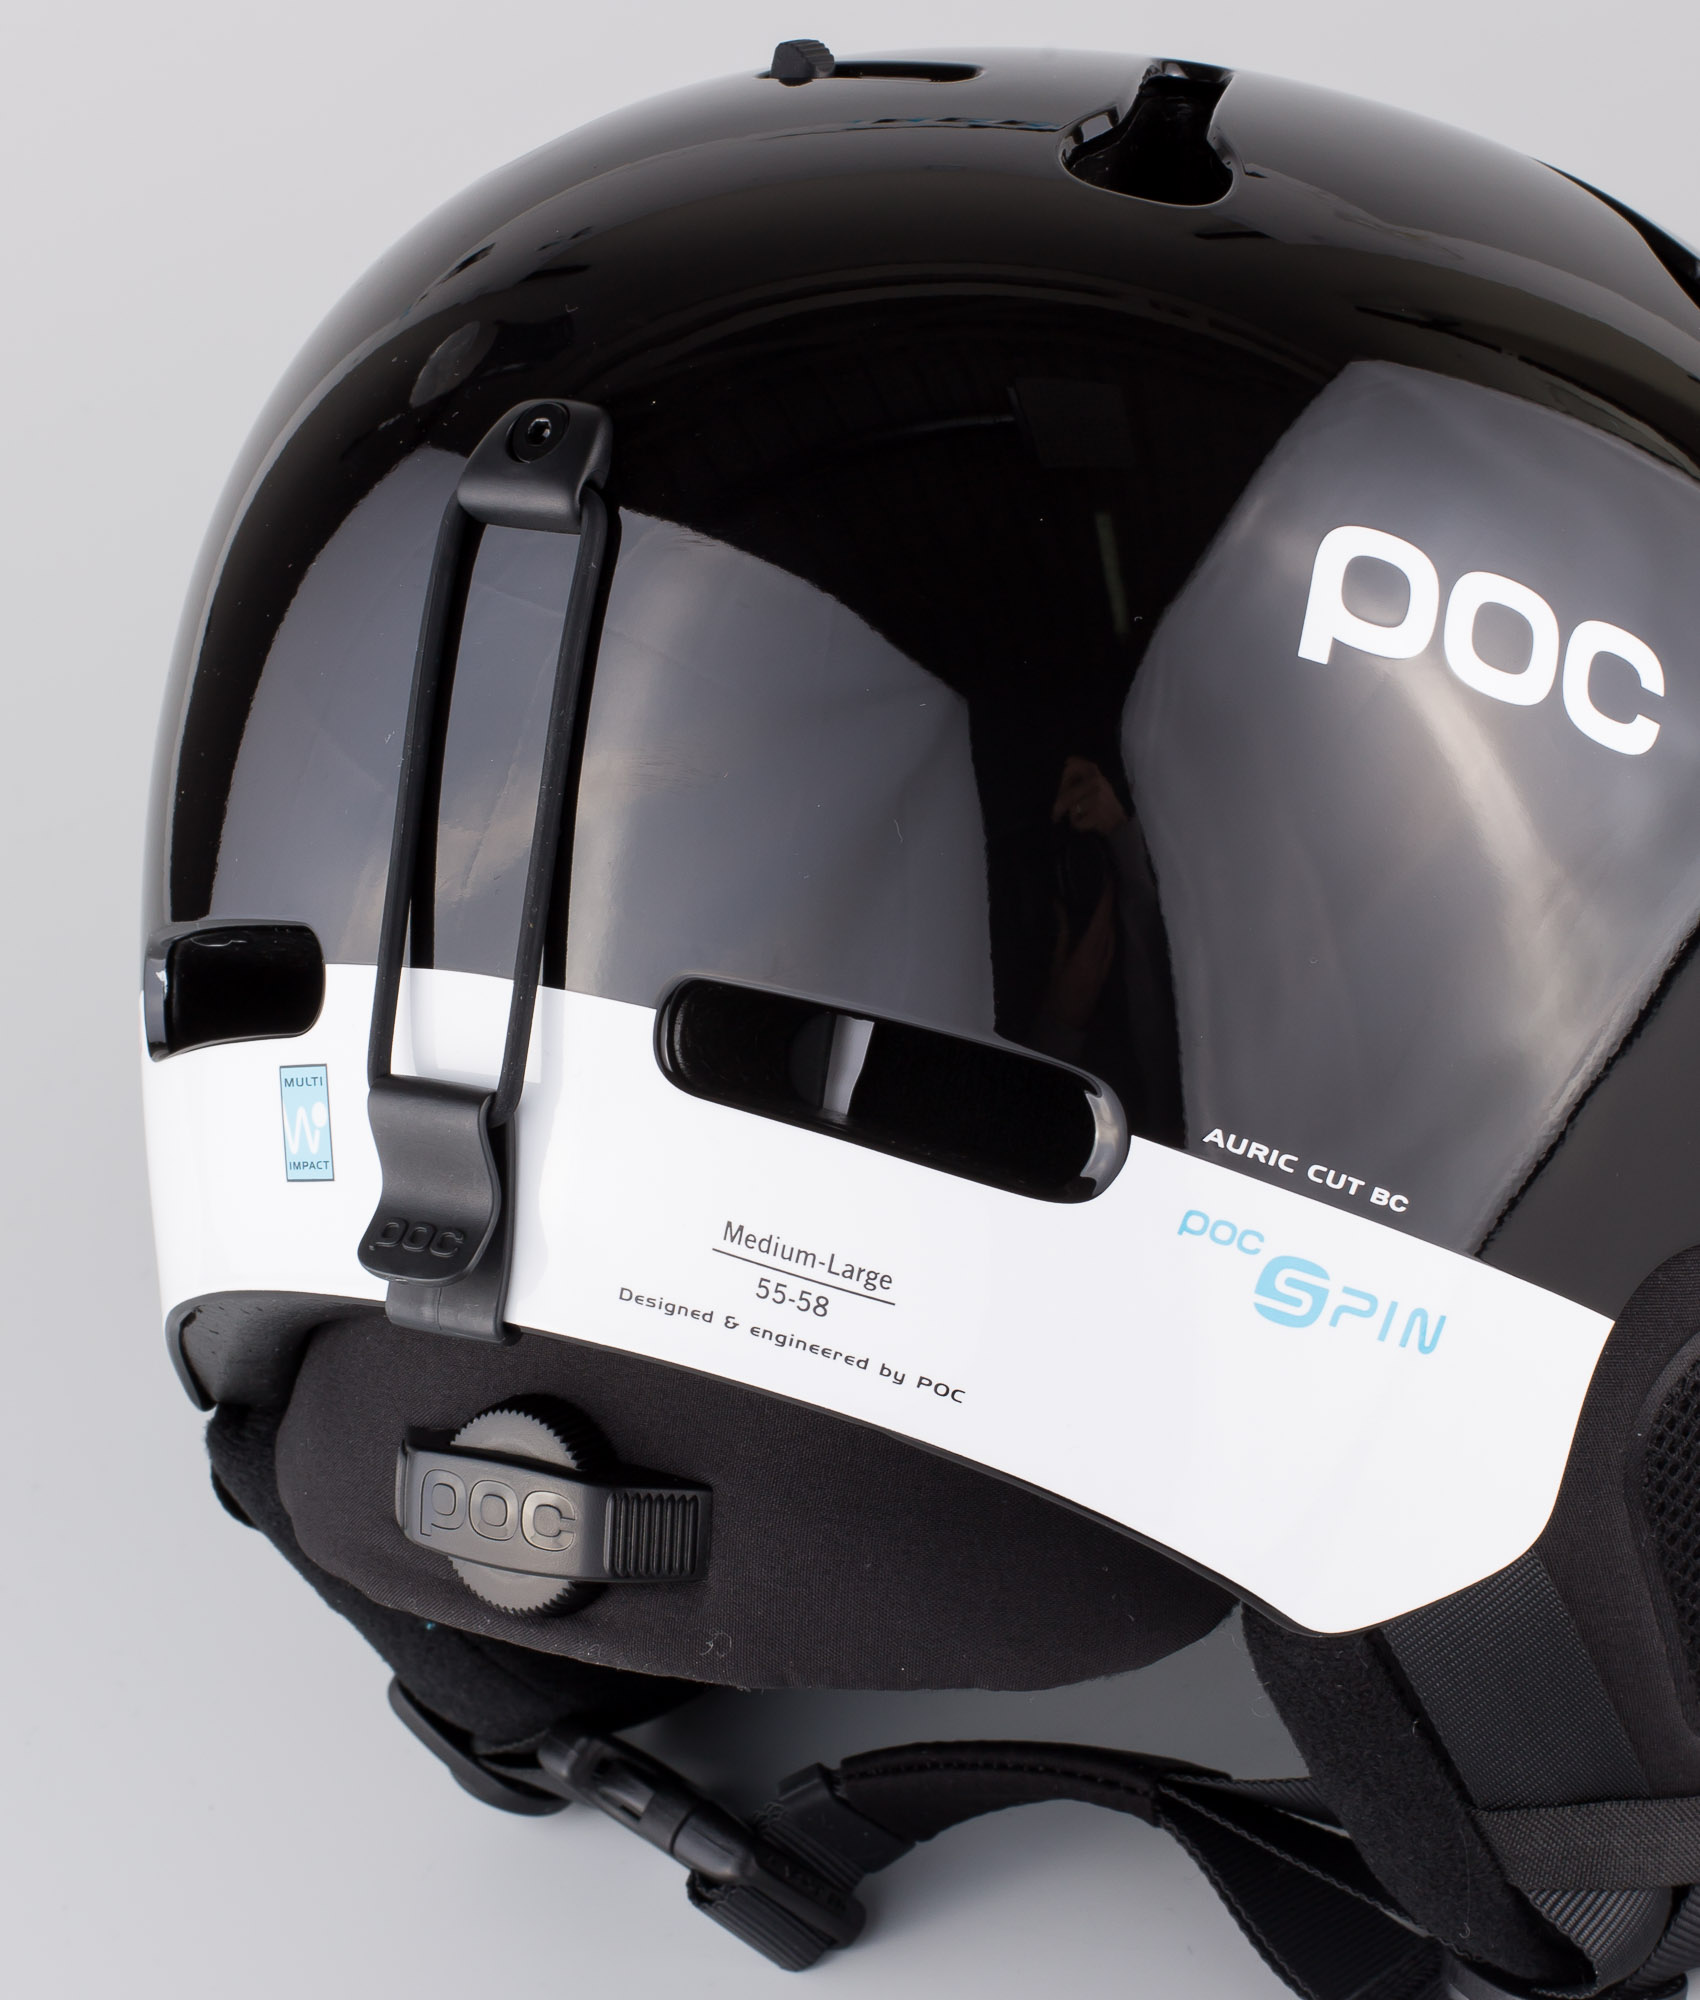 POCito Auric Cut MIPS - Ski Helmet for Kids which Brings